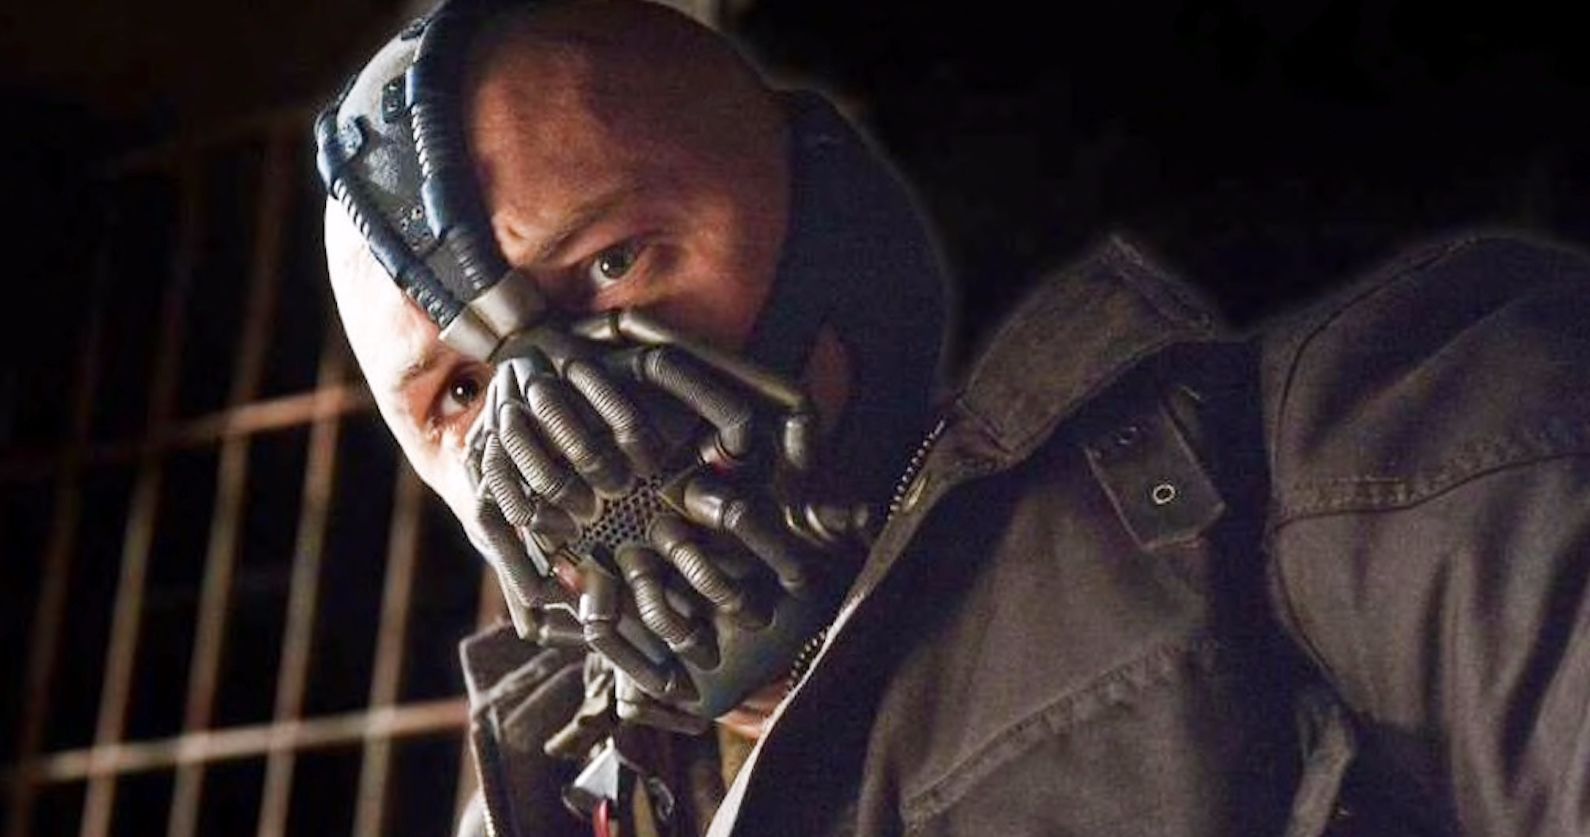 Bane Mask Sales Surge as Businesses and Movie Theaters Begin to Reopen